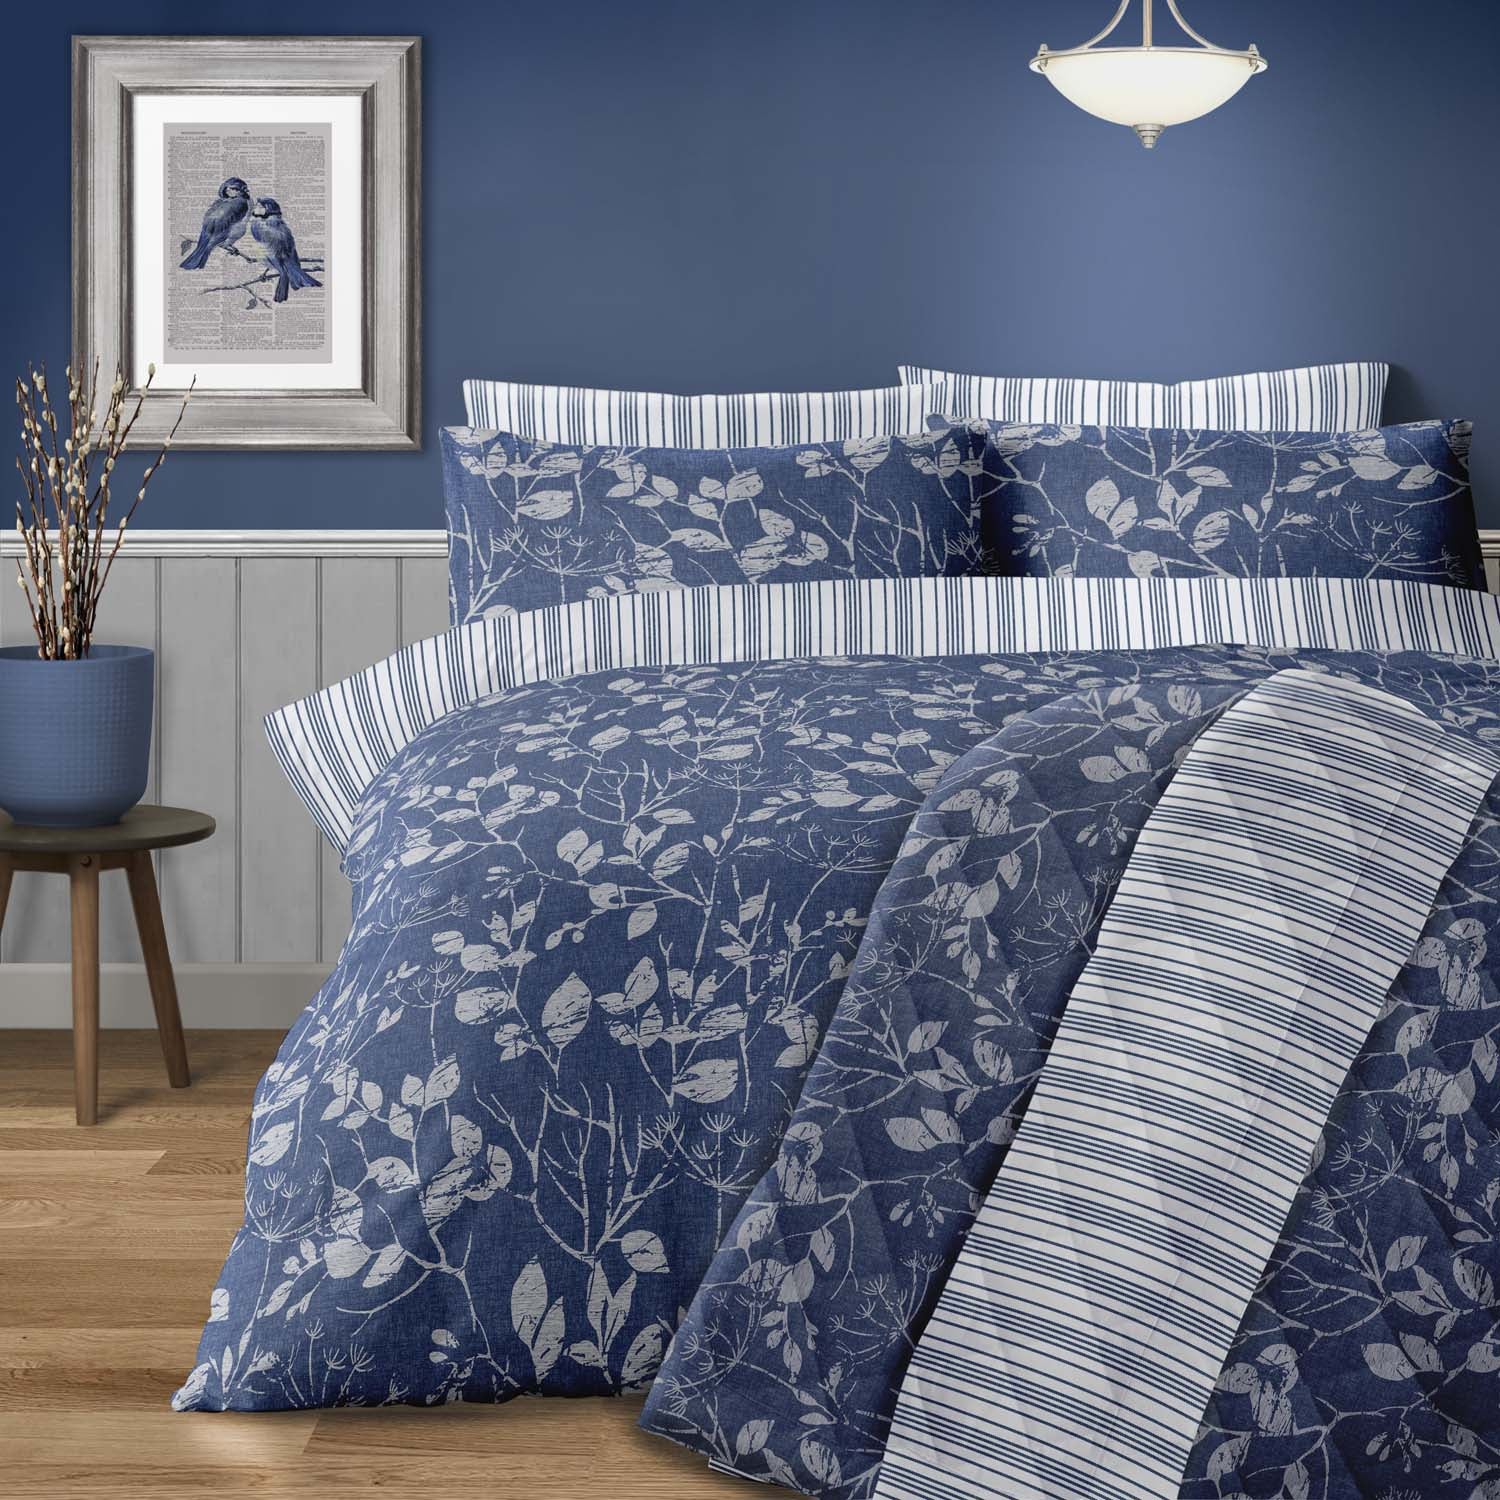  The Home Wooded Dell Duvet Cover Set 1 Shaws Department Stores